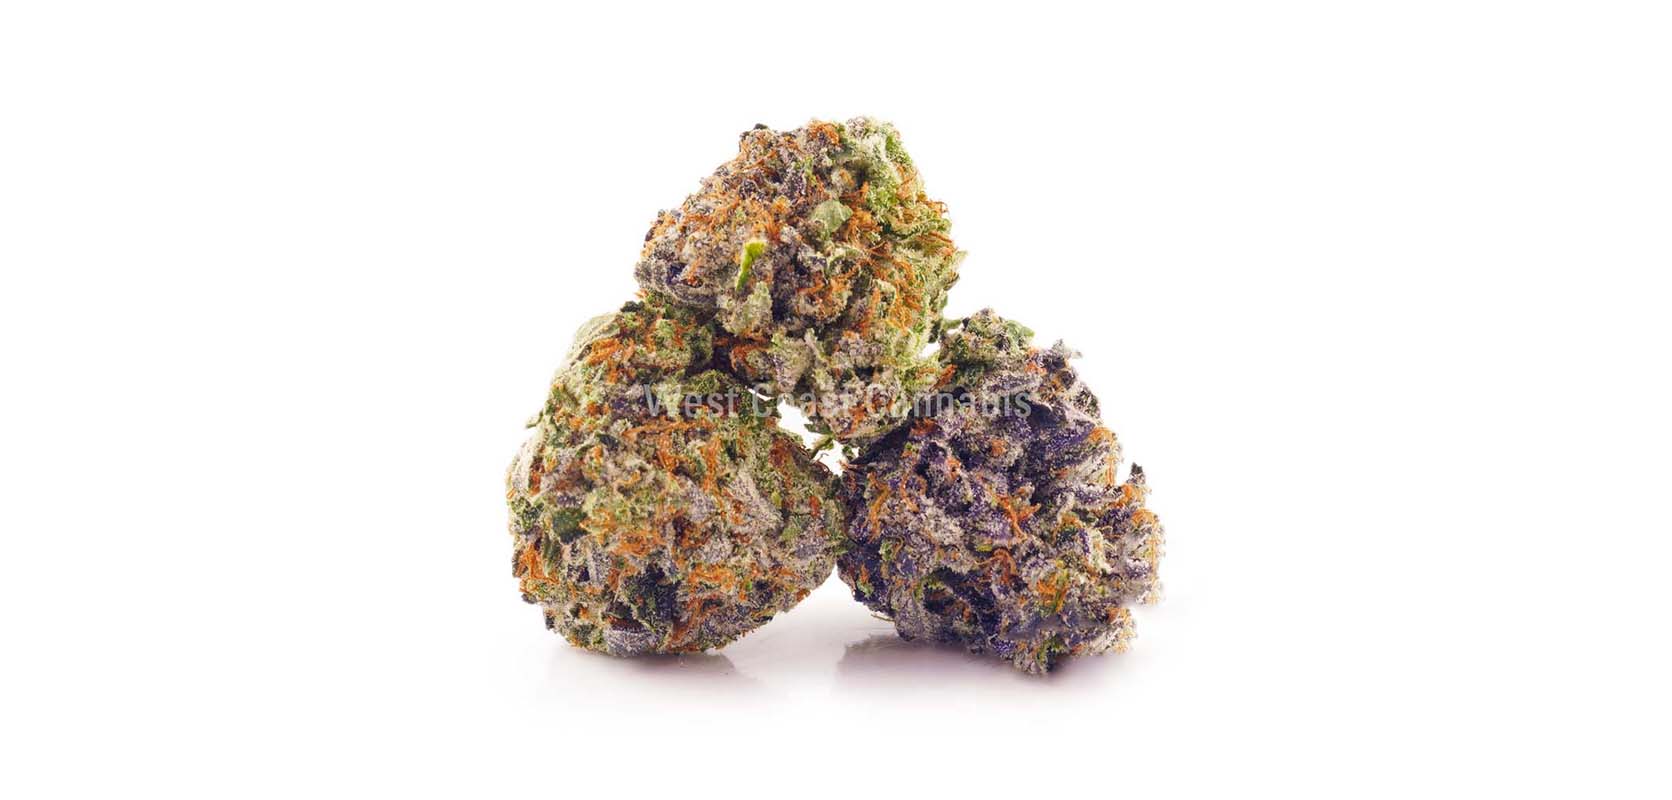 Pink Man Goo budget bud and cheap weed online Canada from West Coast Cannabis online dispensary for mail order marijuana Canada. buy weed.